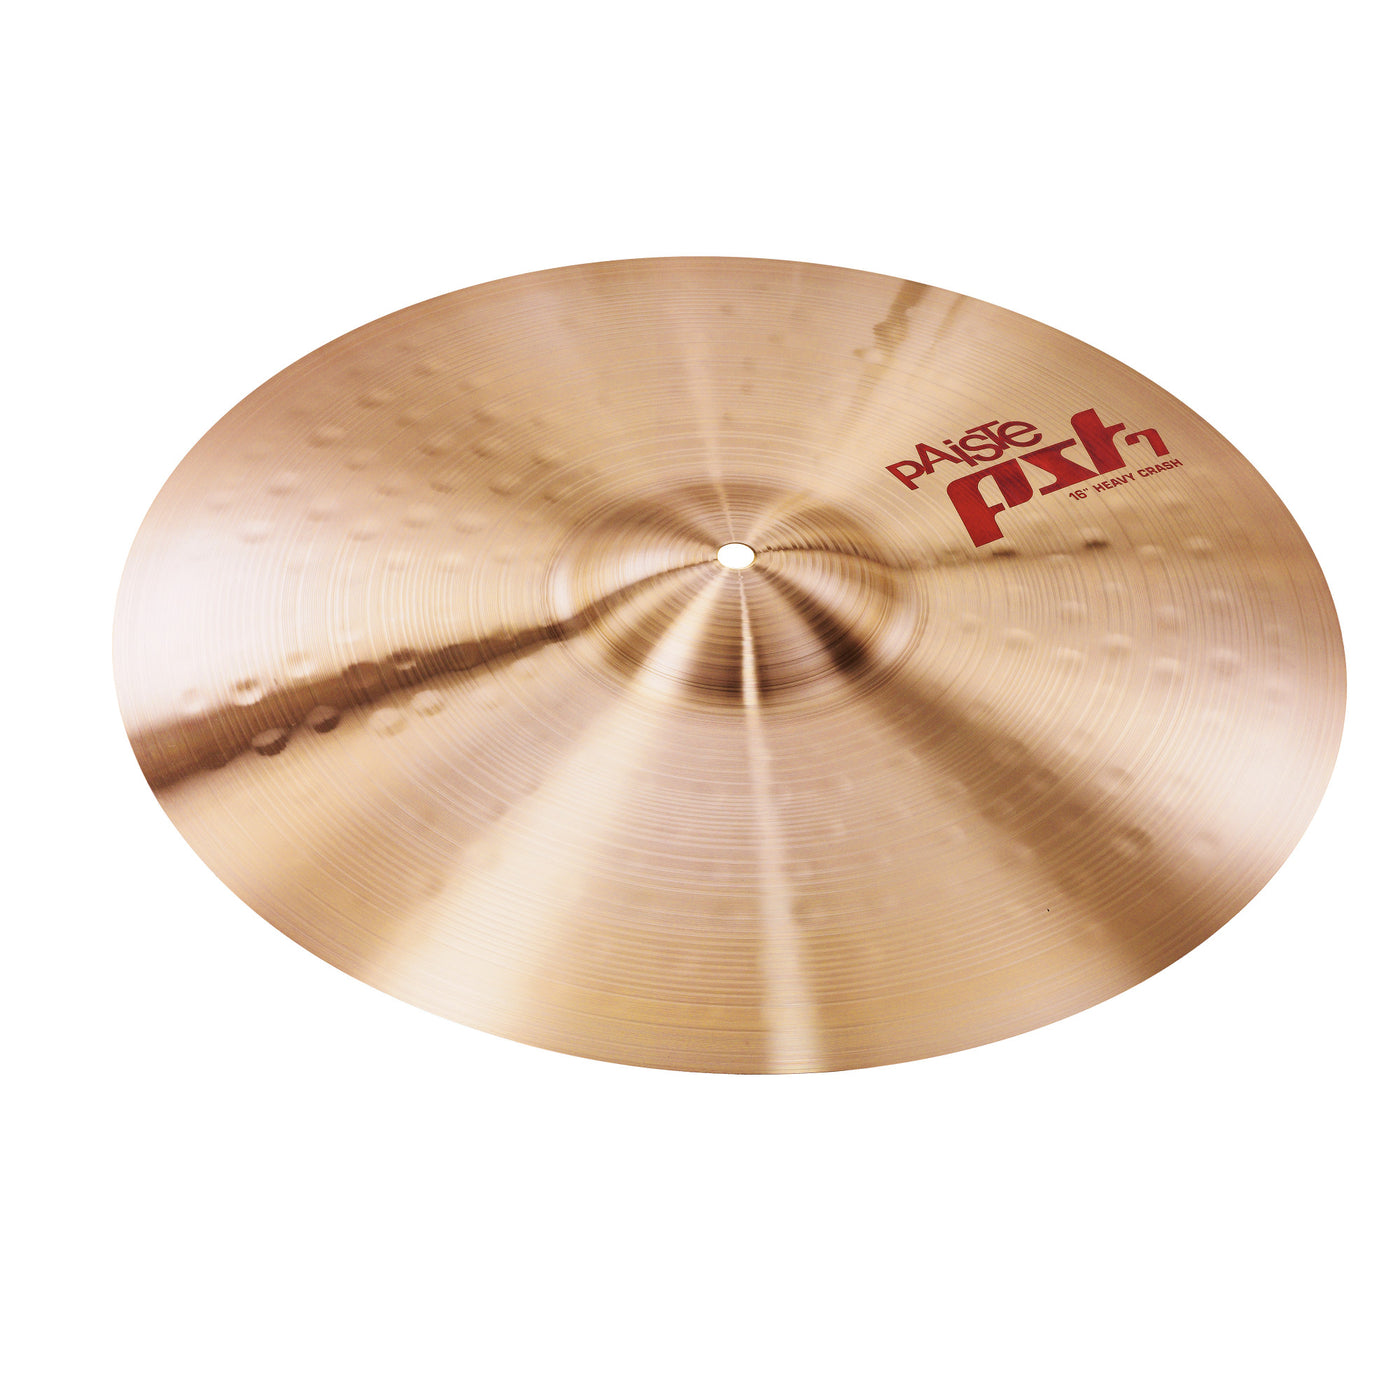 Paiste Heavy Crash Cymbal, PST 7 Series, Percussion Instrument for Drums, 16"